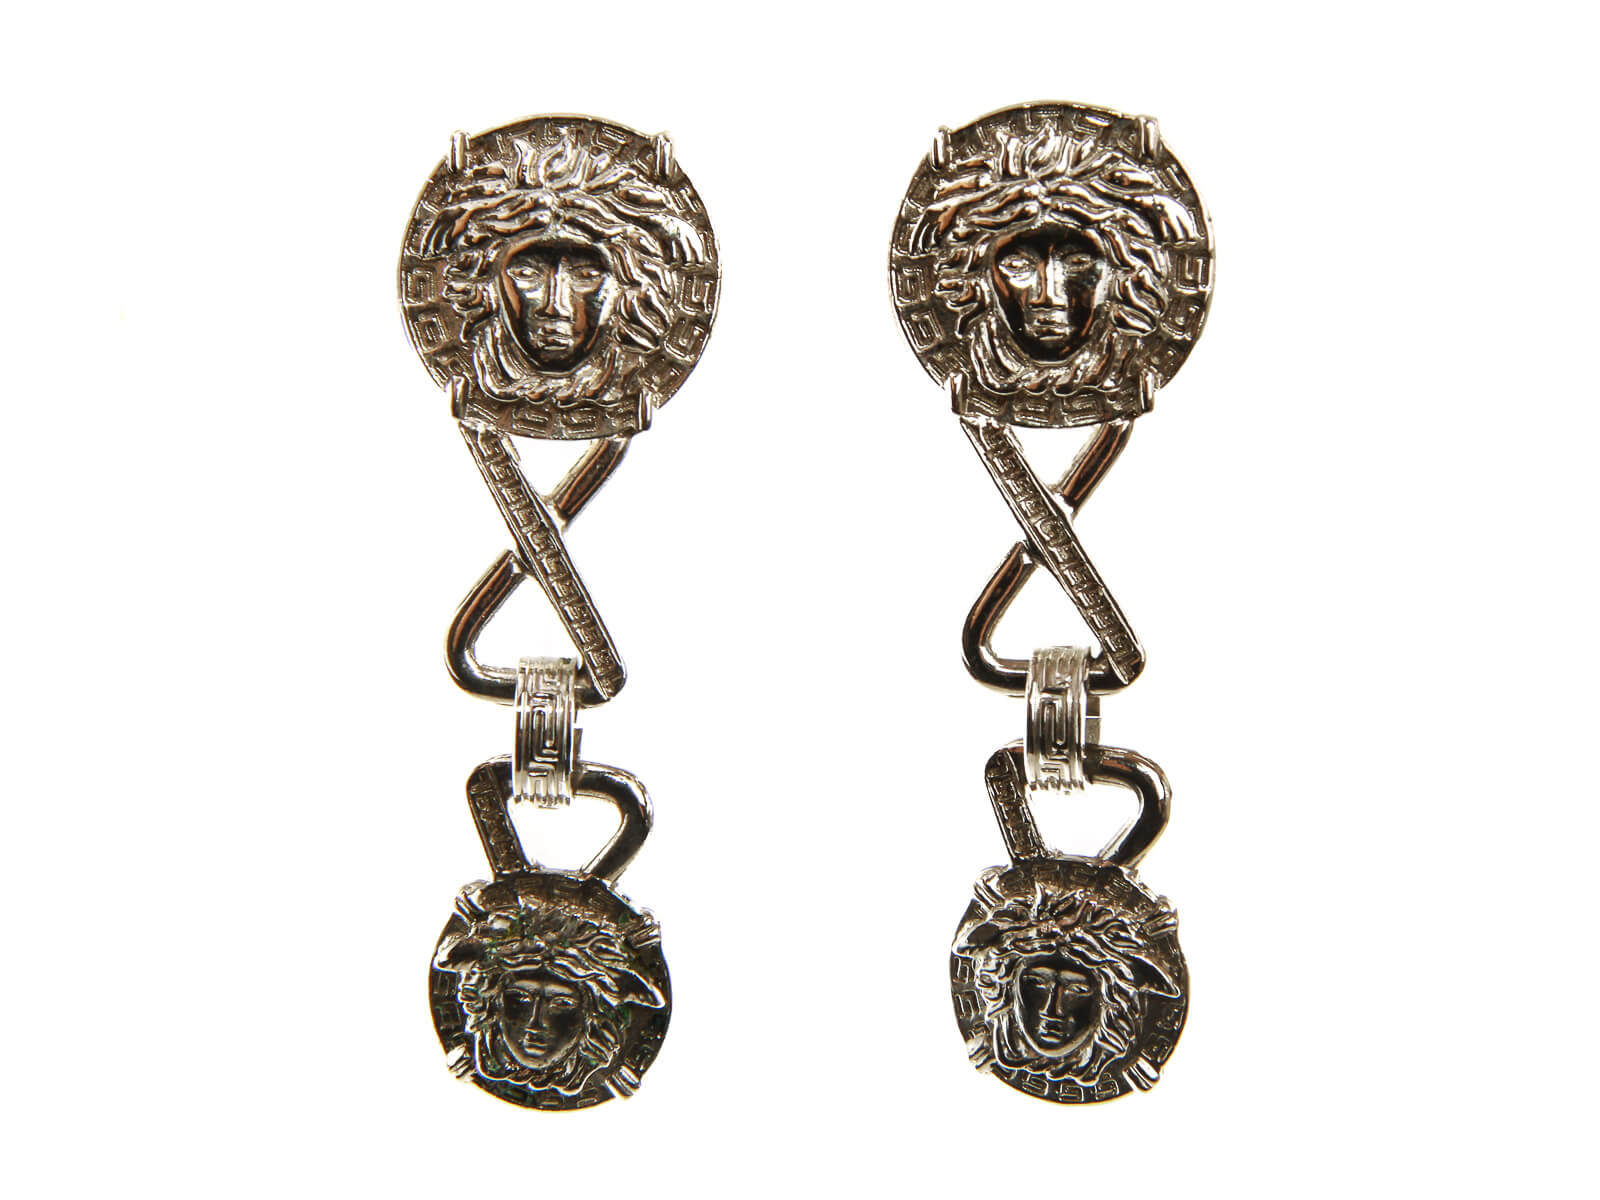 Authentic Gianni Versace Medusa Cufflinks gold plated